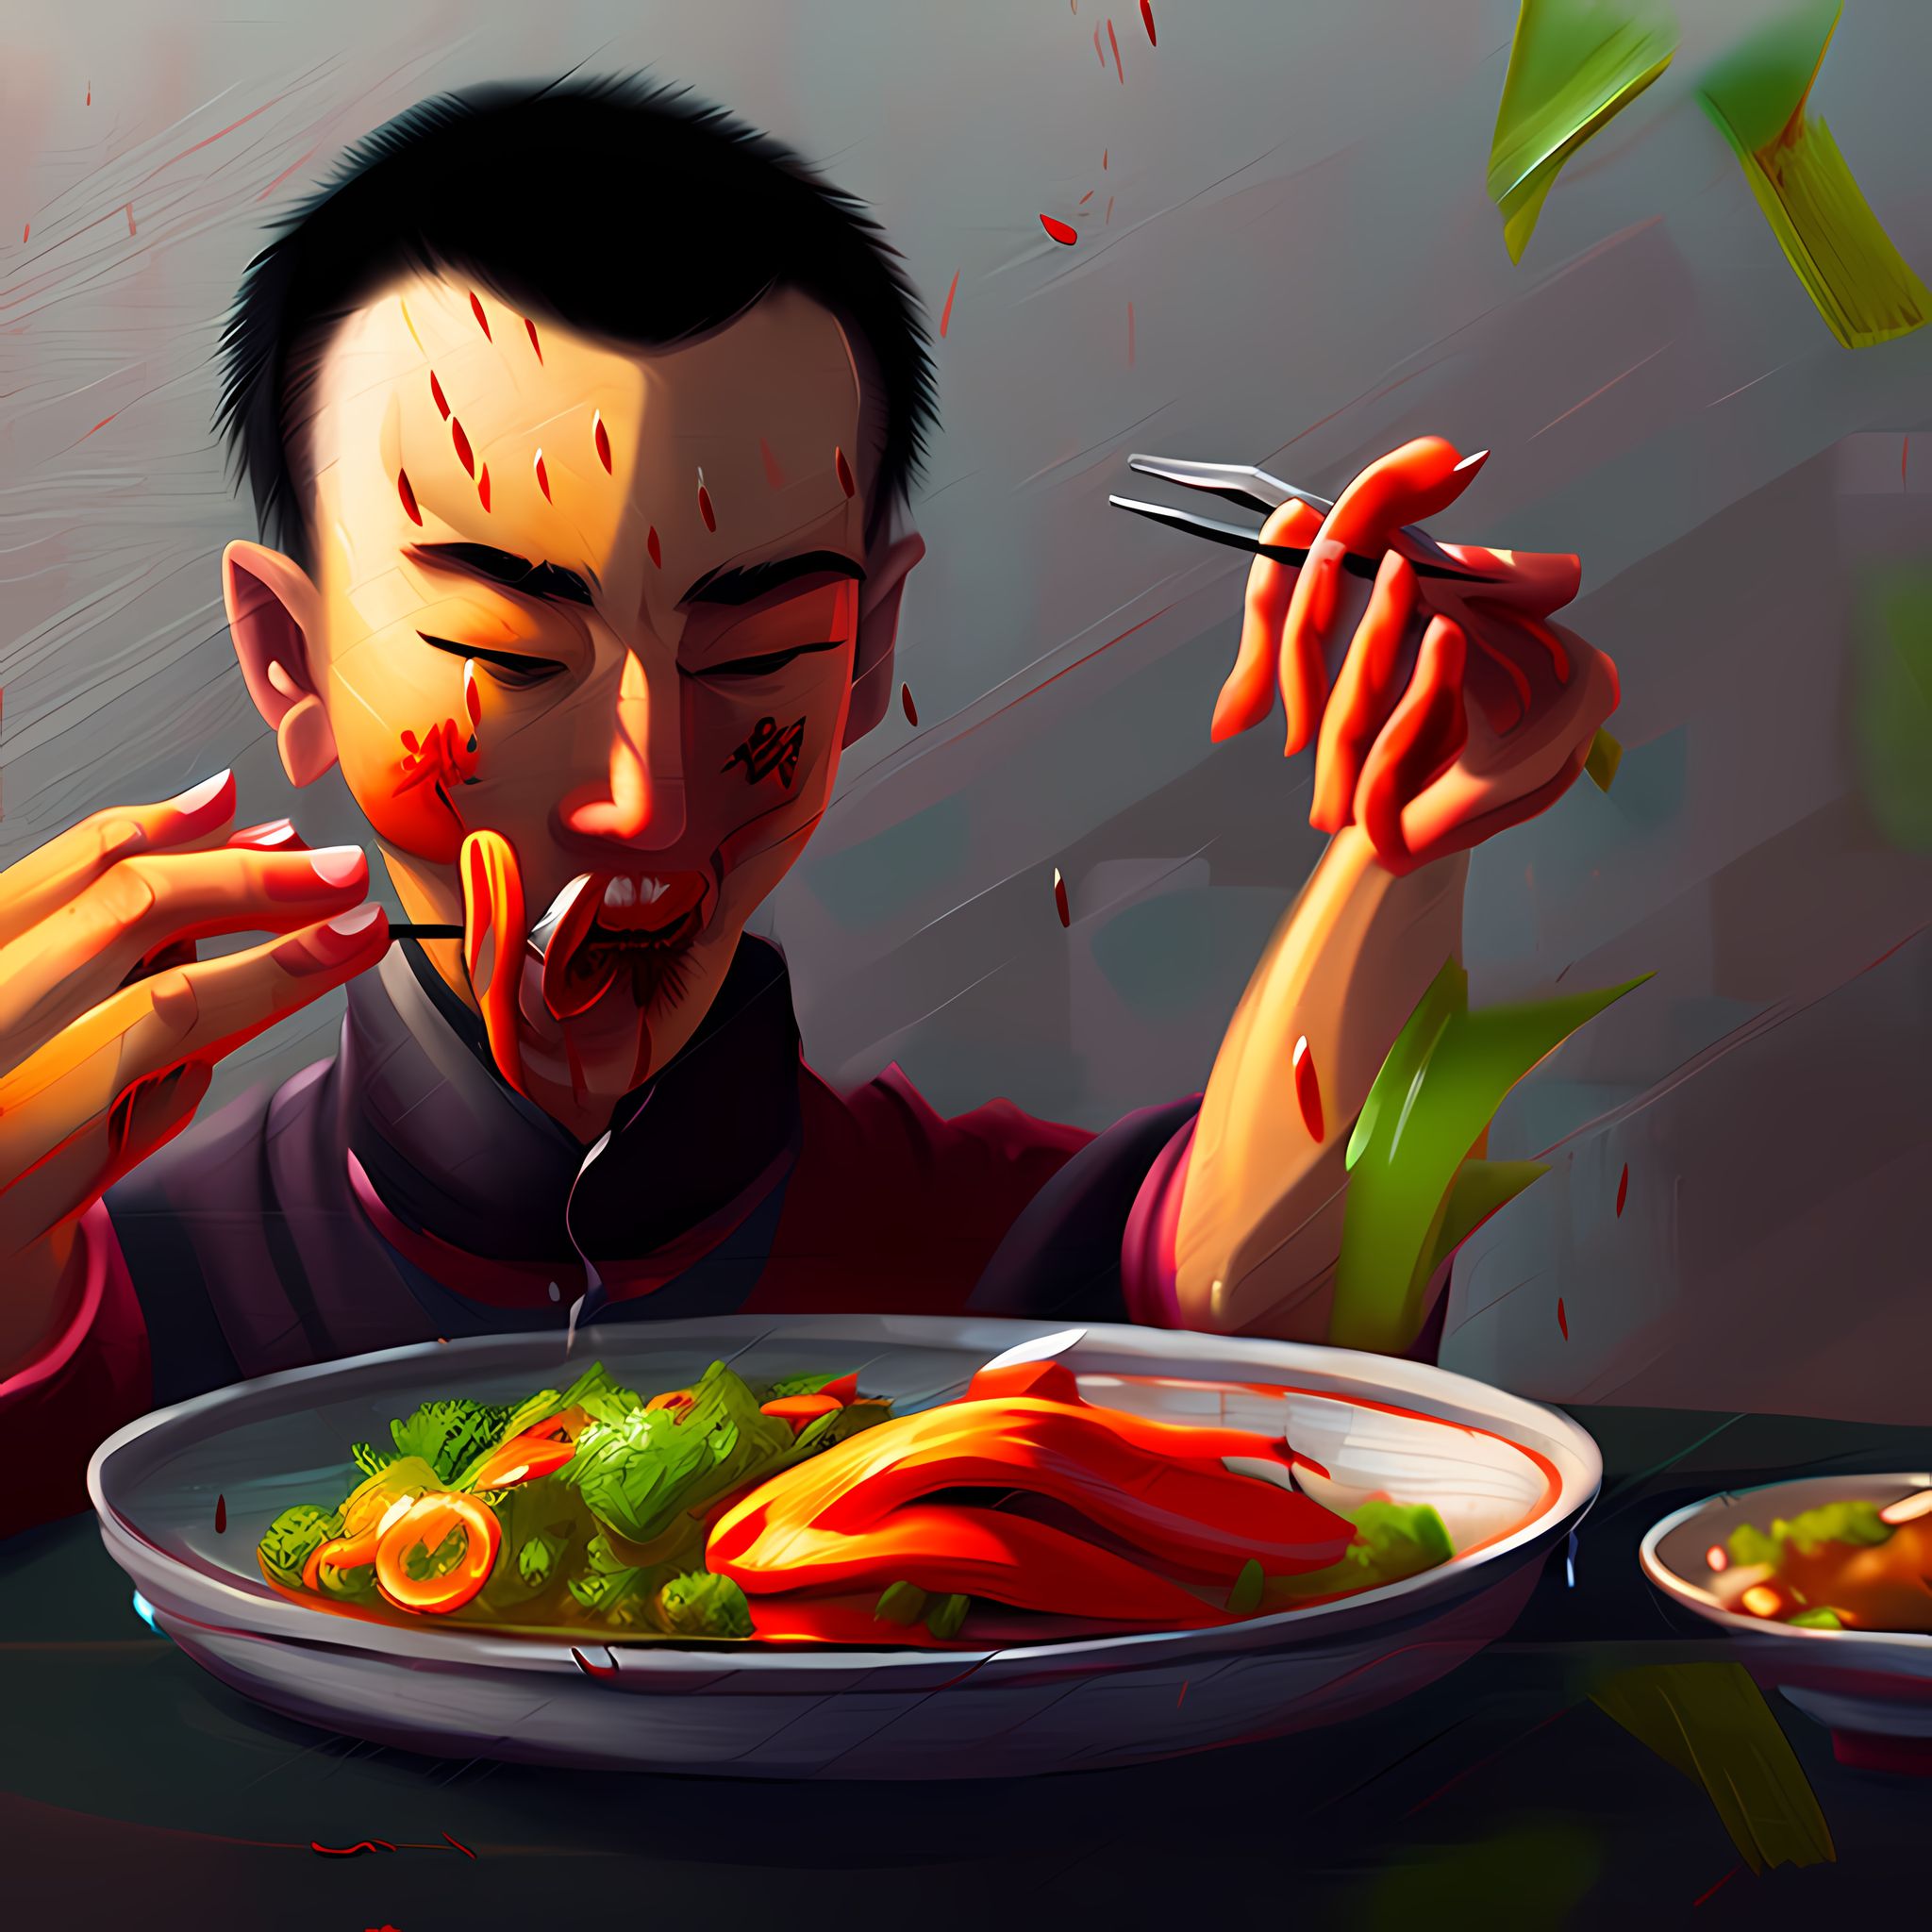 painting-of-Northern-Chinese-food-winter-person-eating-sharp-focus-face-focused-trending-on-Art-h1yo